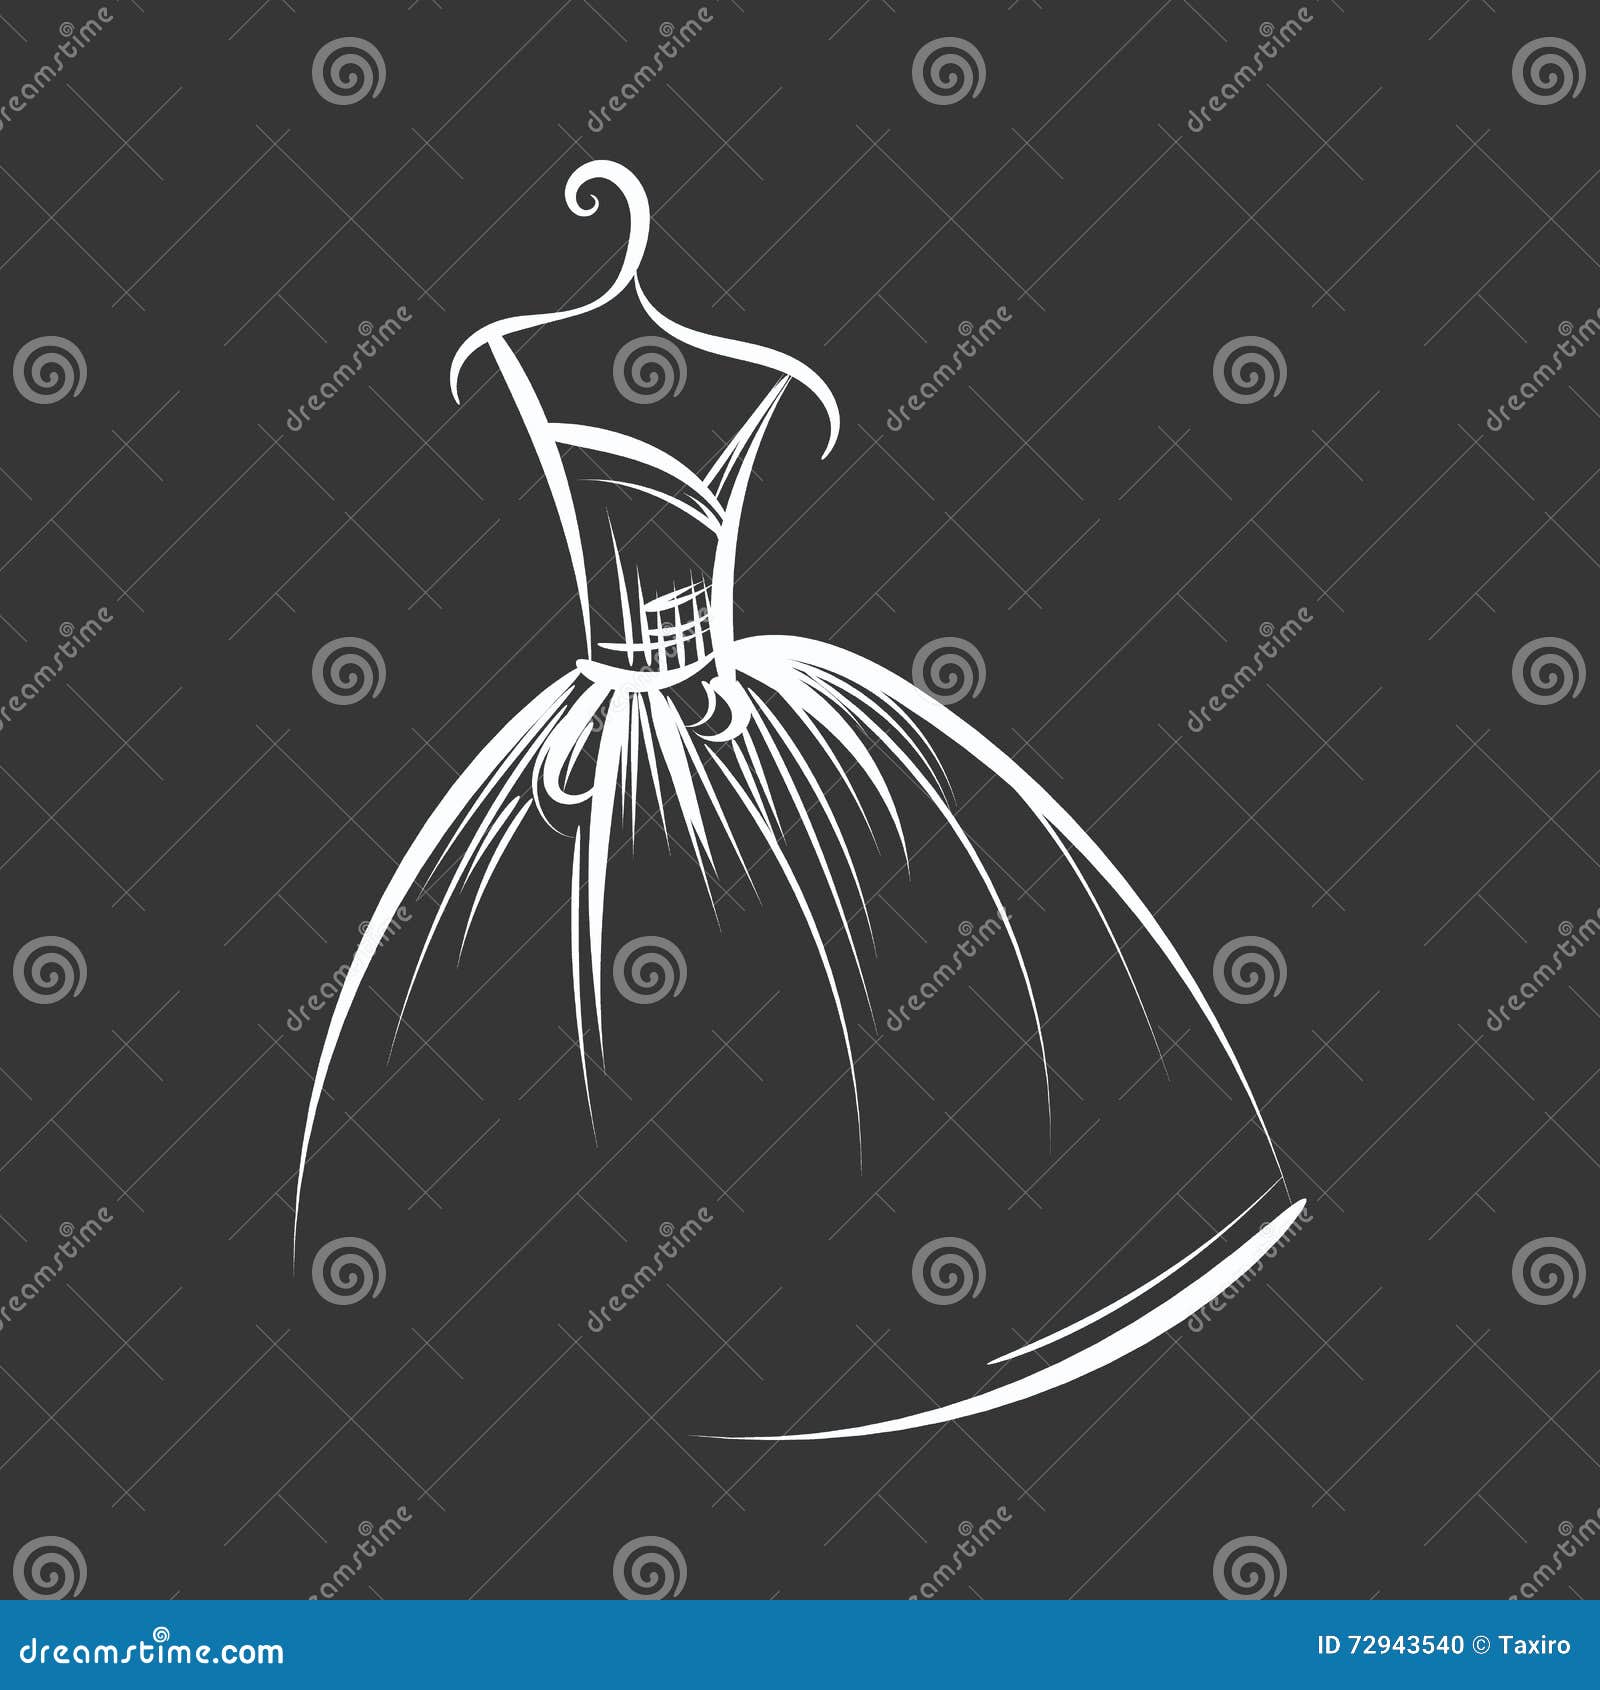 Ball Gown Hand Drawing on a Hanger Stock Vector - Illustration of frill ...